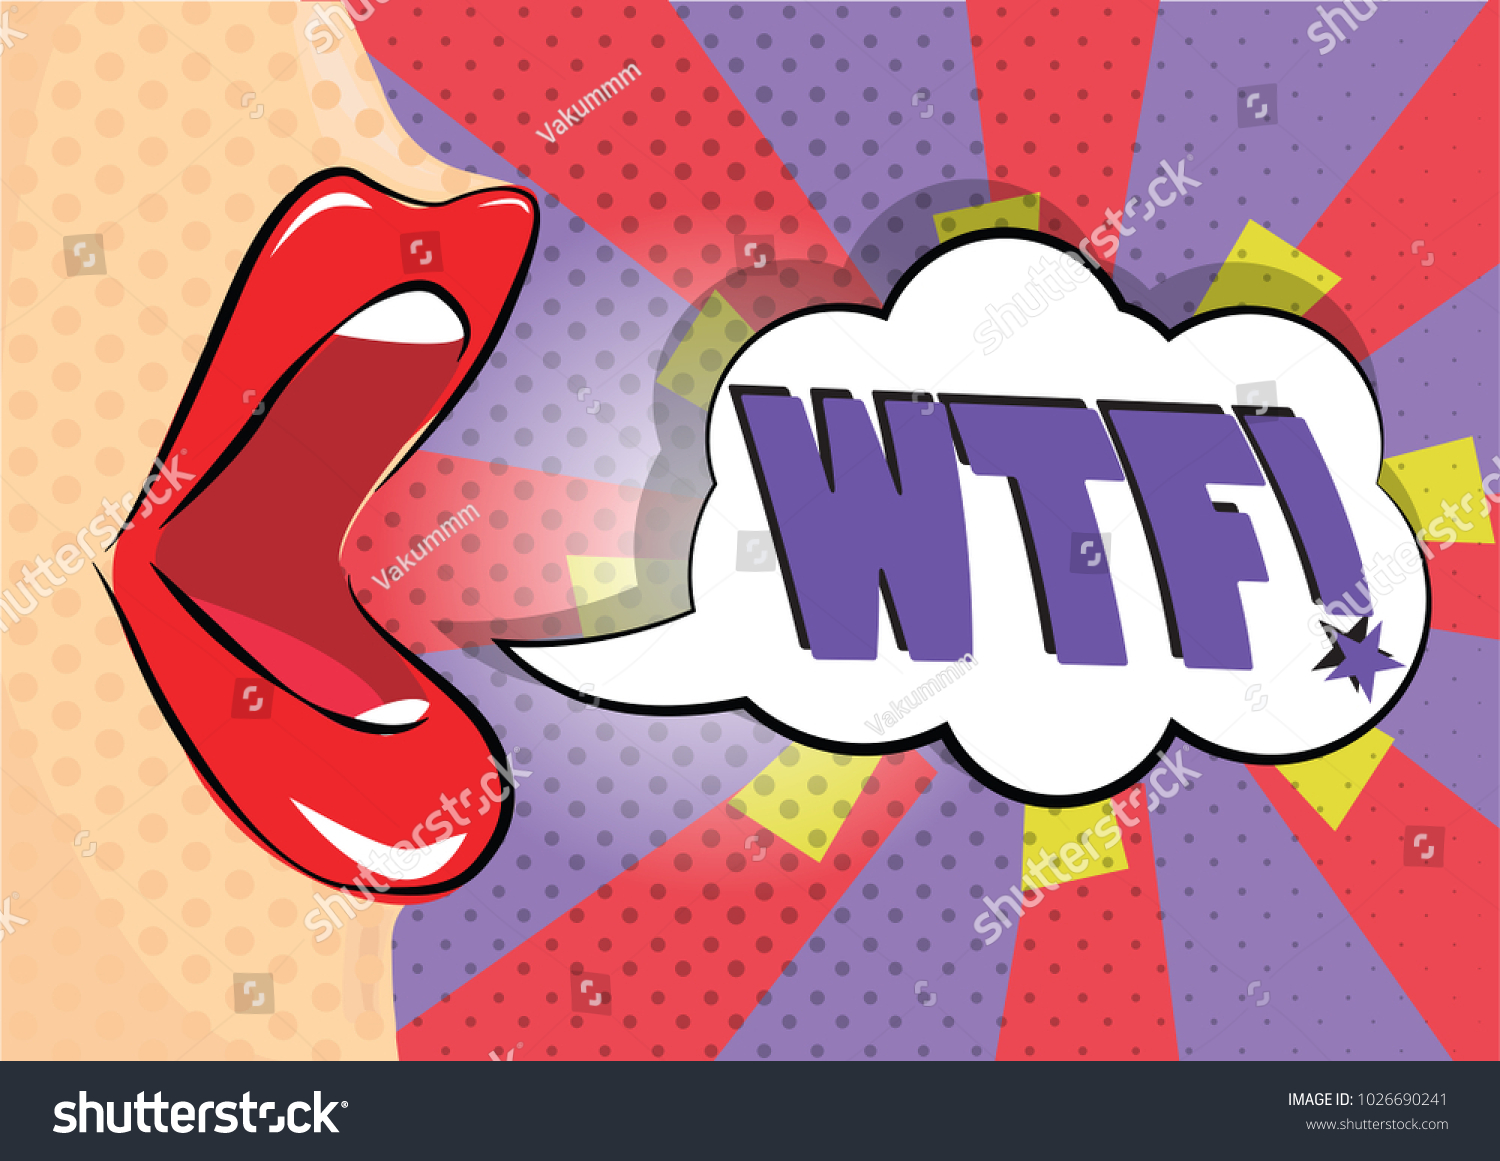 Comic Speech Bubble With Different Emotions And Royalty Free Stock Vector 1026690241 